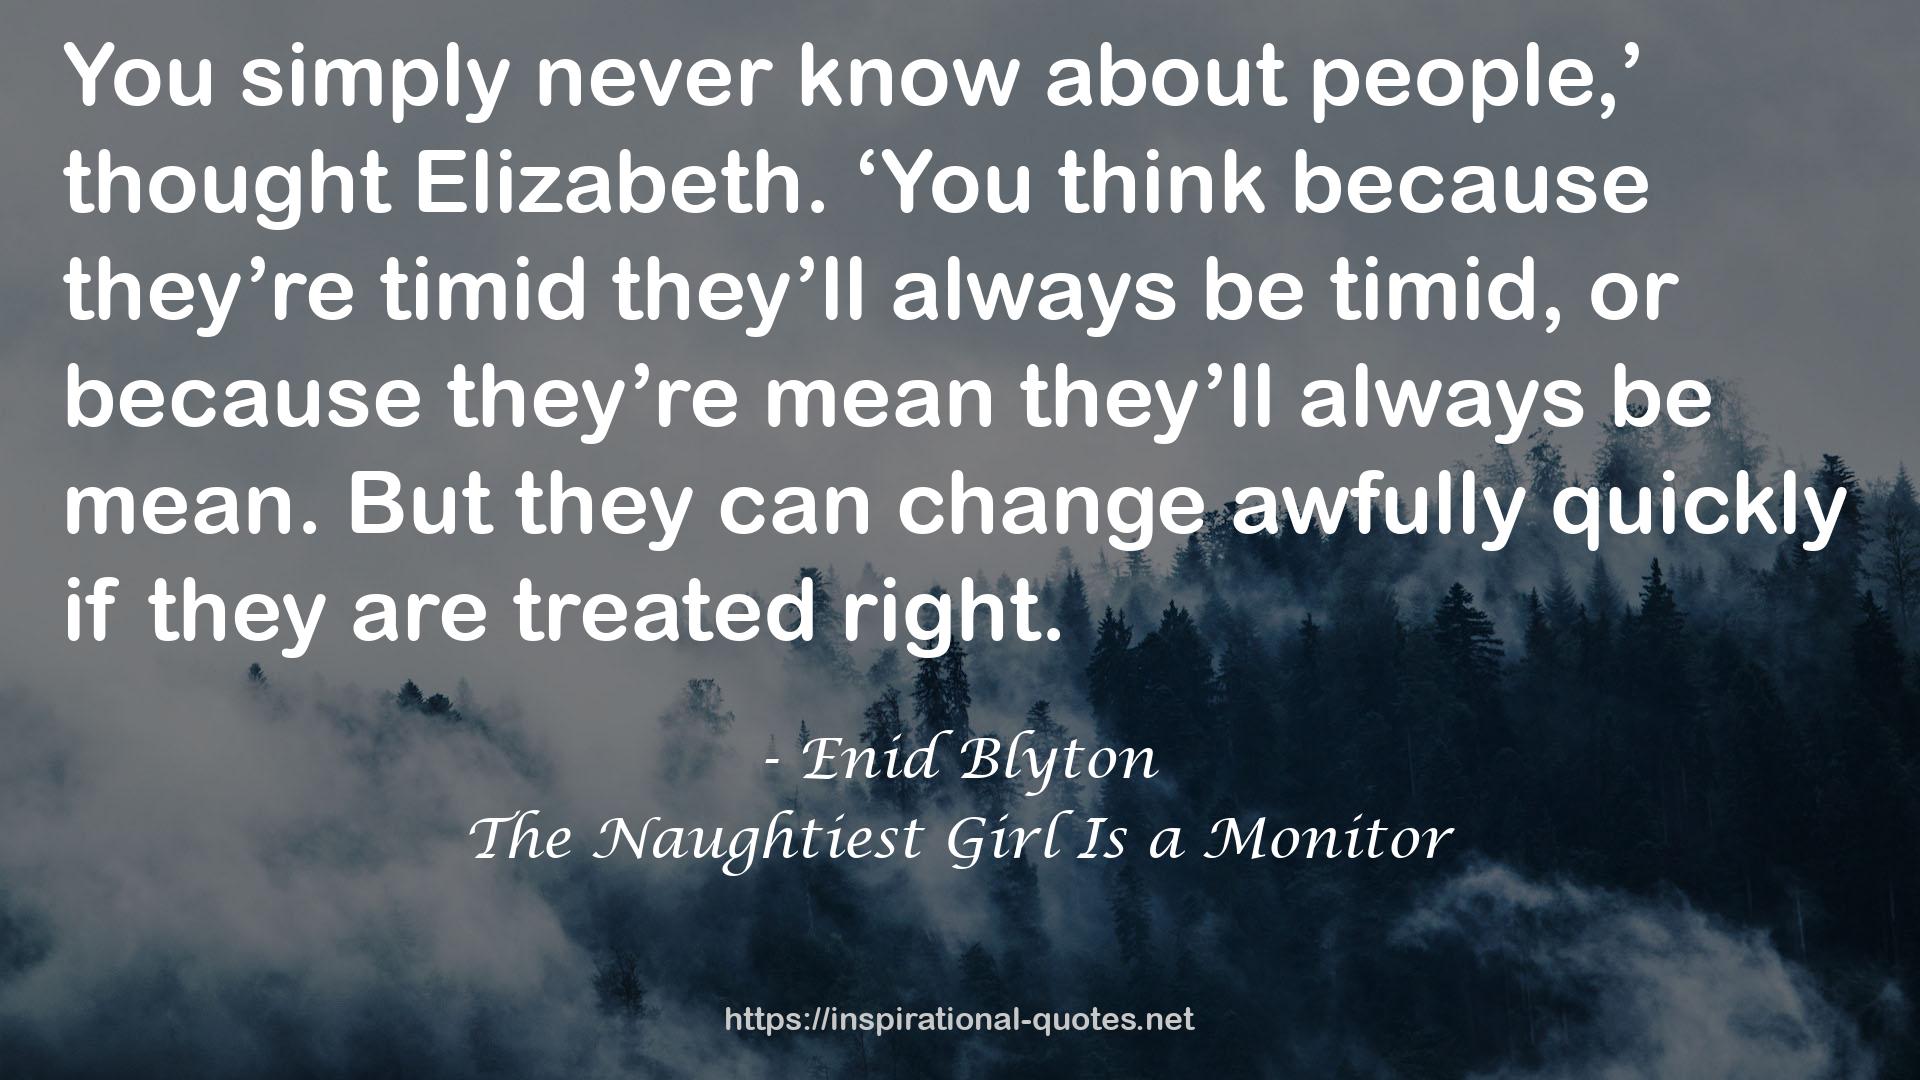 The Naughtiest Girl Is a Monitor QUOTES